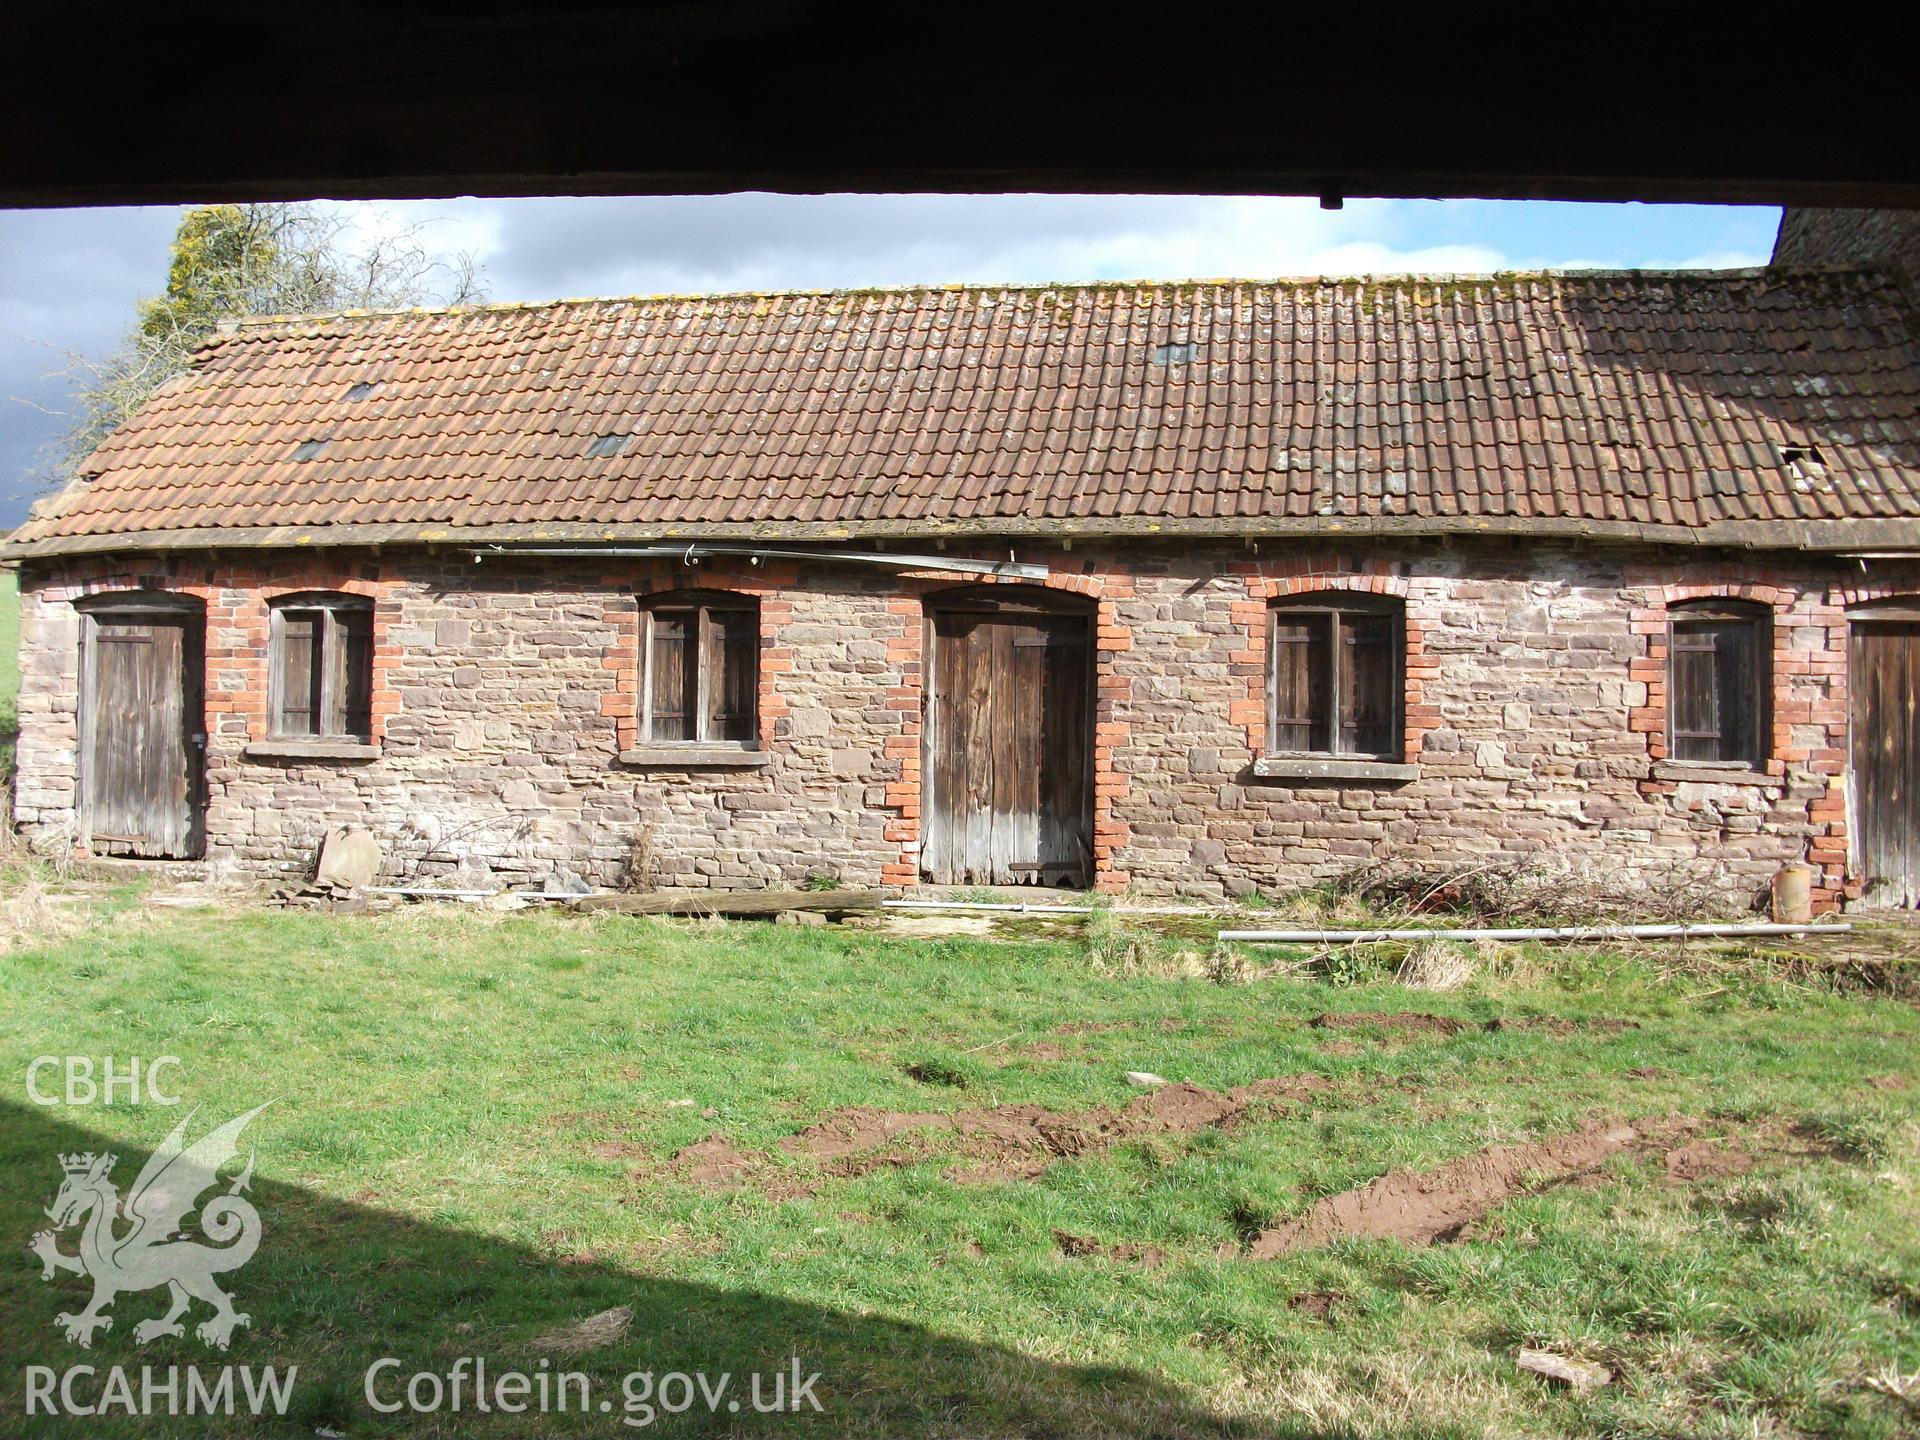 Colour digital photograph of exterior of barn at Llangwm Isaf Farm, received in the course of Emergency Recording case ref no RCS2/1/1599.